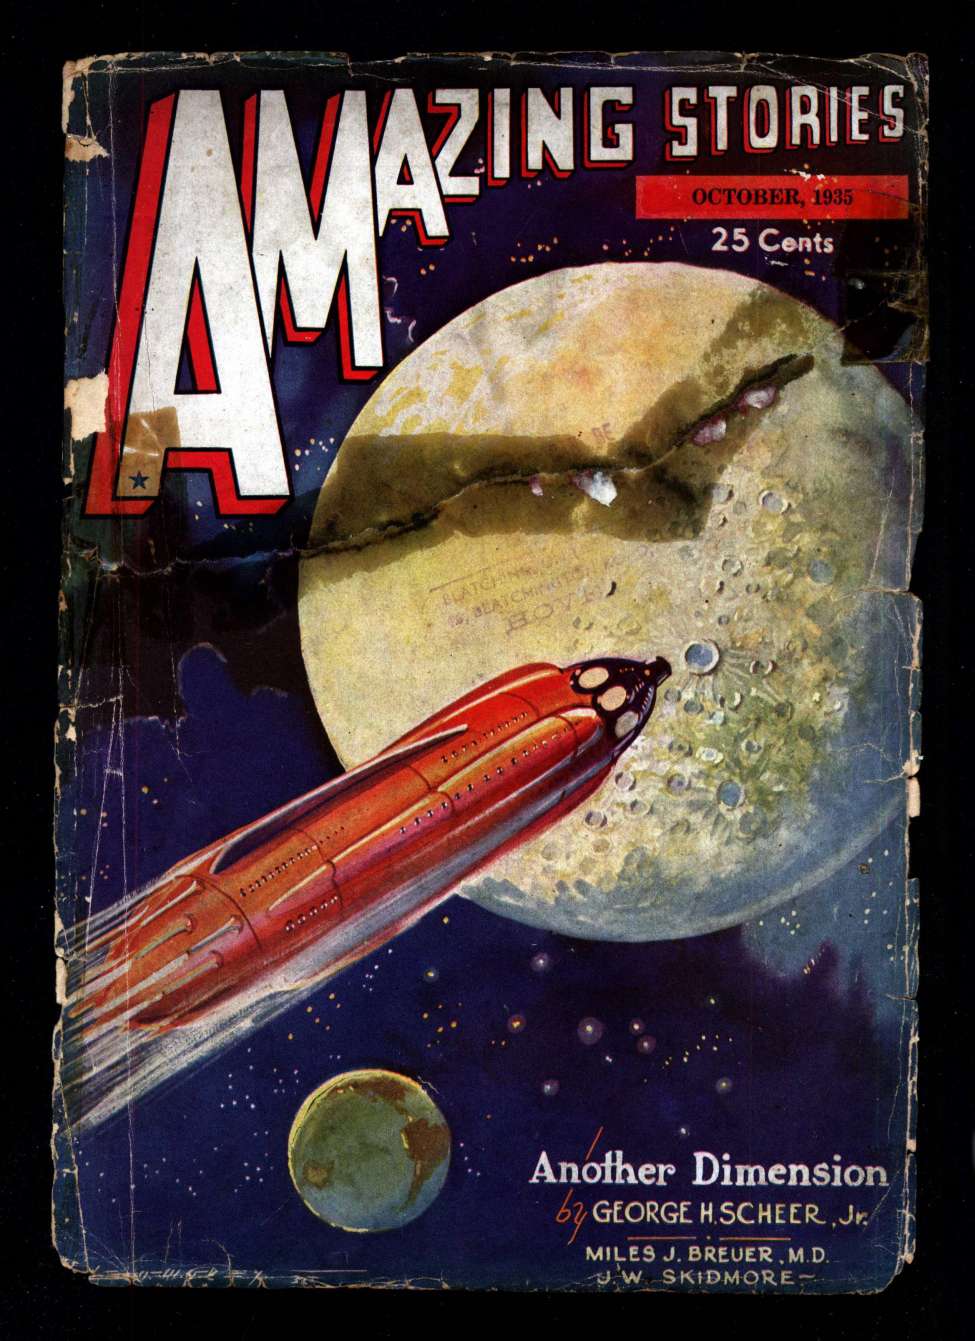 Comic Book Cover For Amazing Stories v10 6 - Another Dimension - George H. Scheer, Jr.